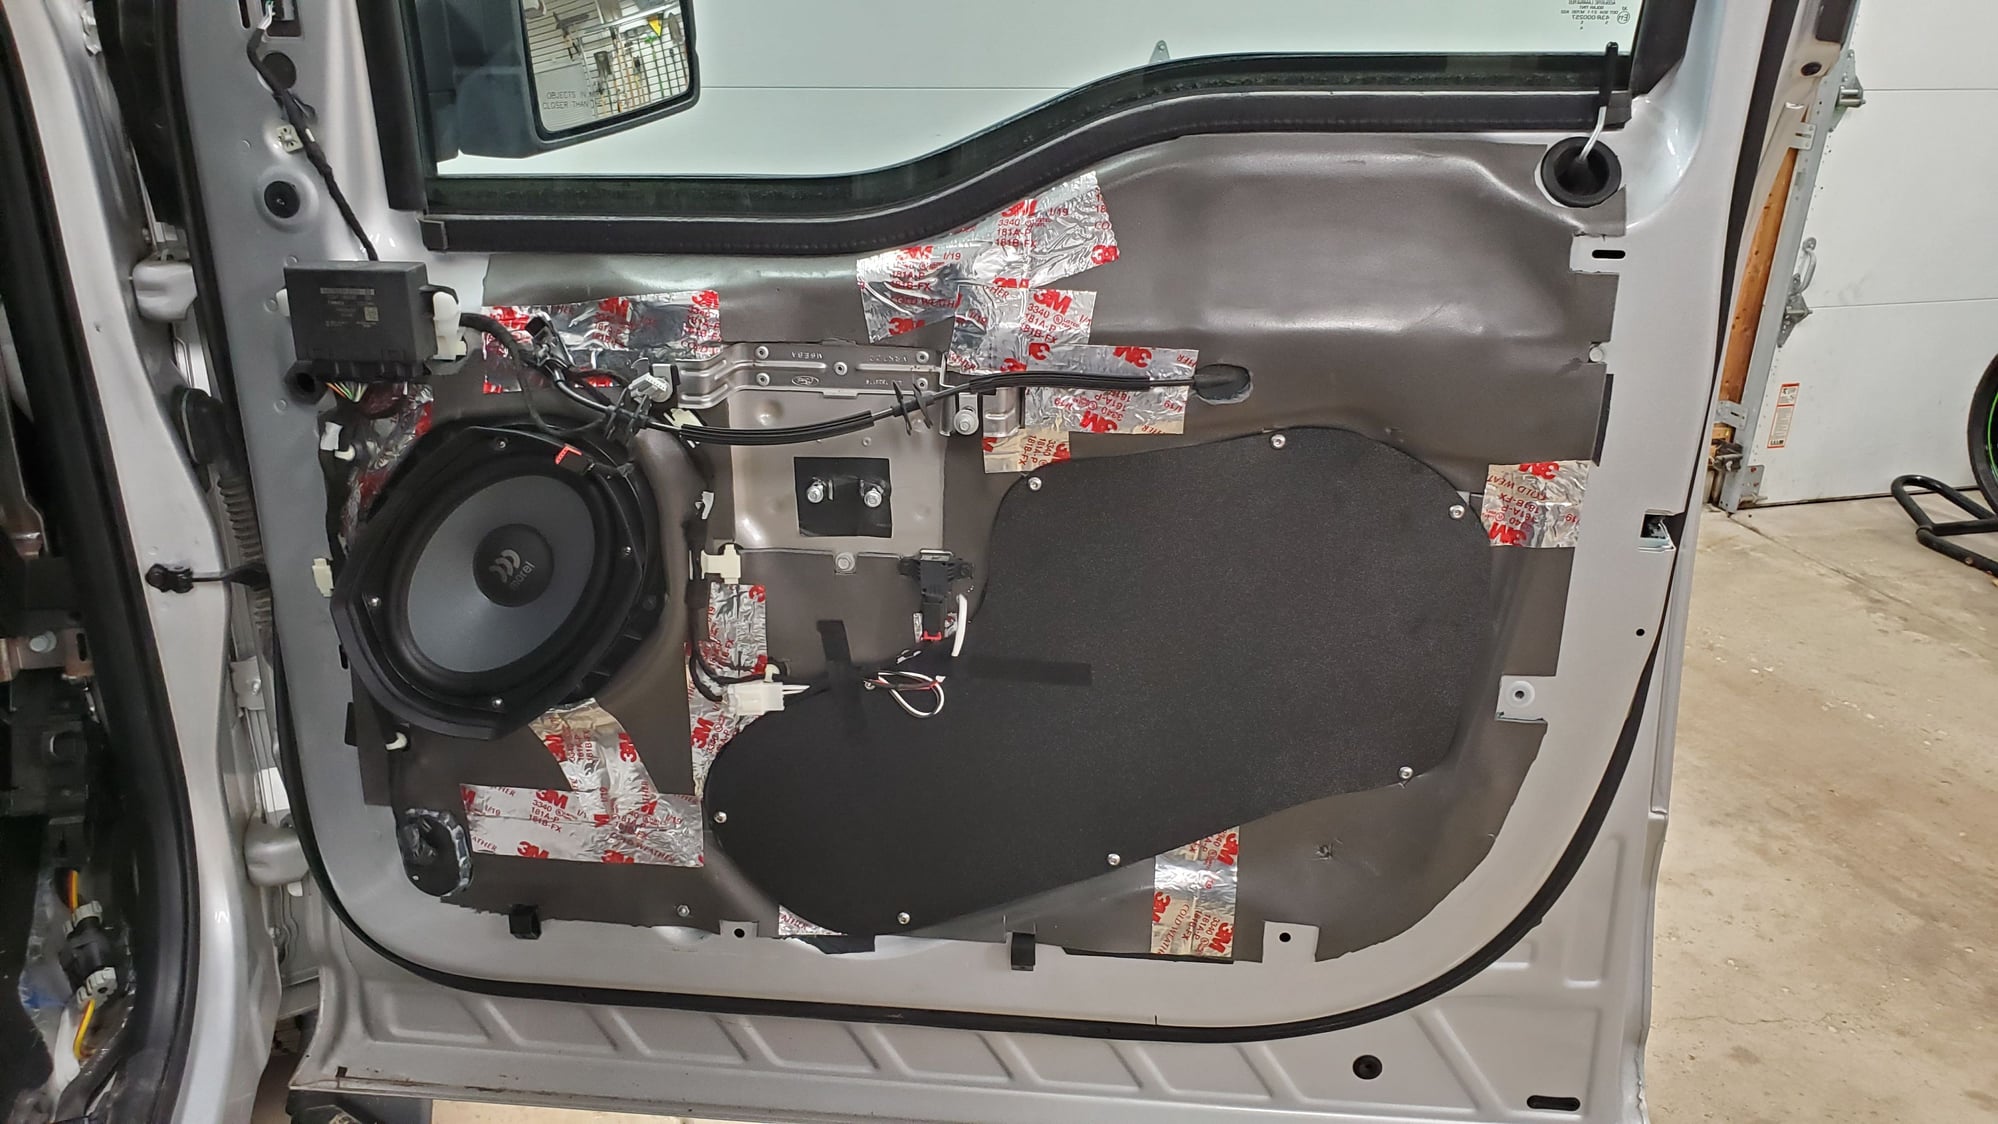 Speaker Wiring As I Upgrade? - Ford F150 Forum - Community of Ford